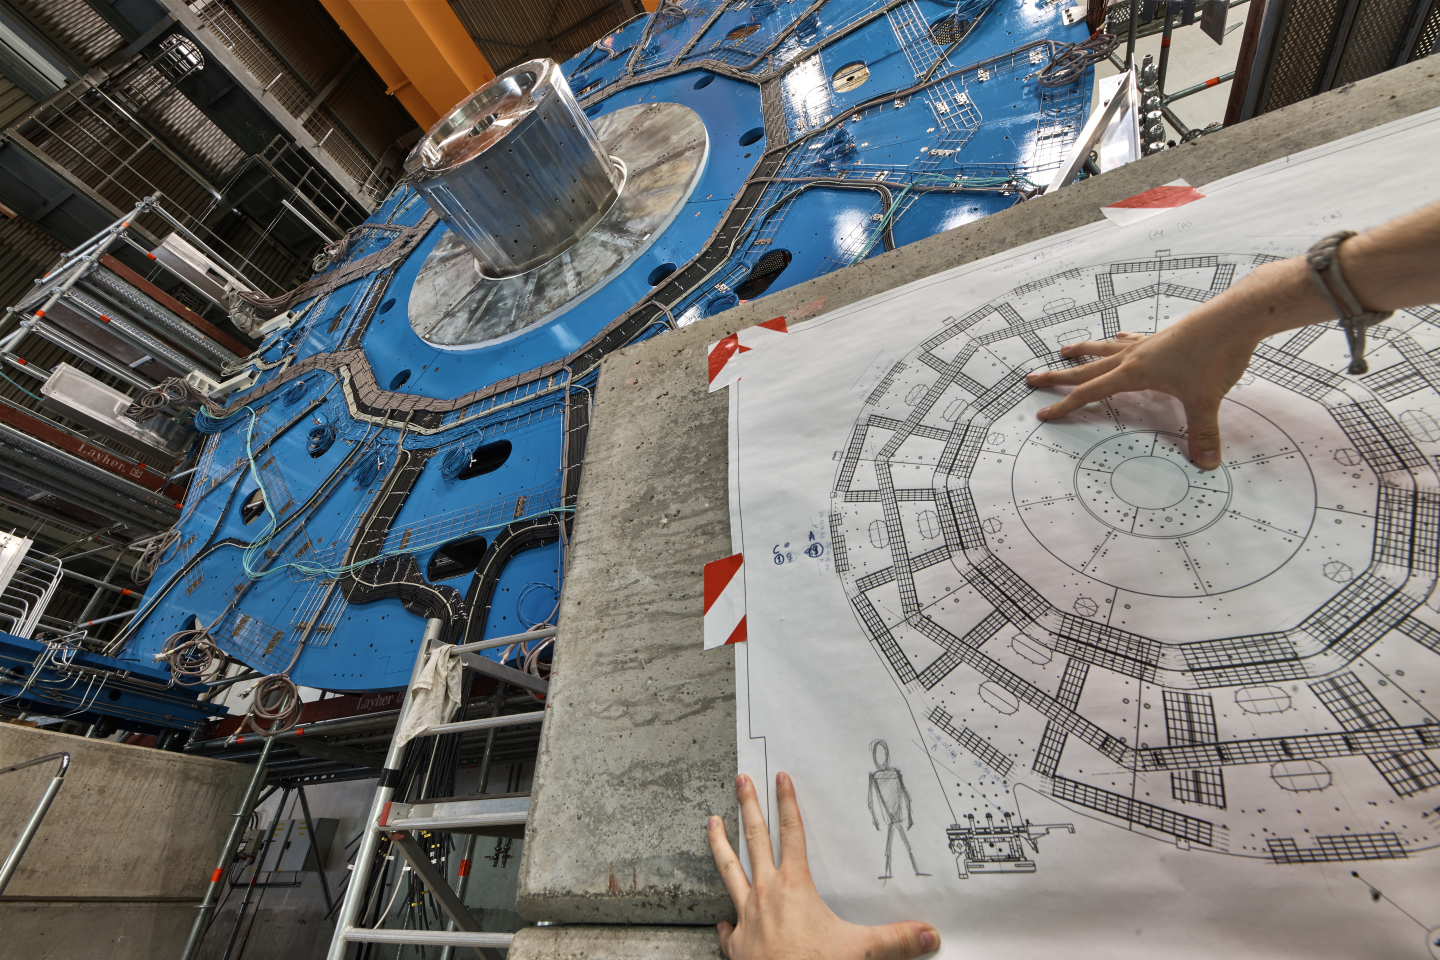 Photo - A new wheel-shaped muon detector is part of the ATLAS detector upgrade at CERN. This wheel-shaped detector measures more than 30 feet in diameter. (Credit: Julien Marius Ordan/CERN)